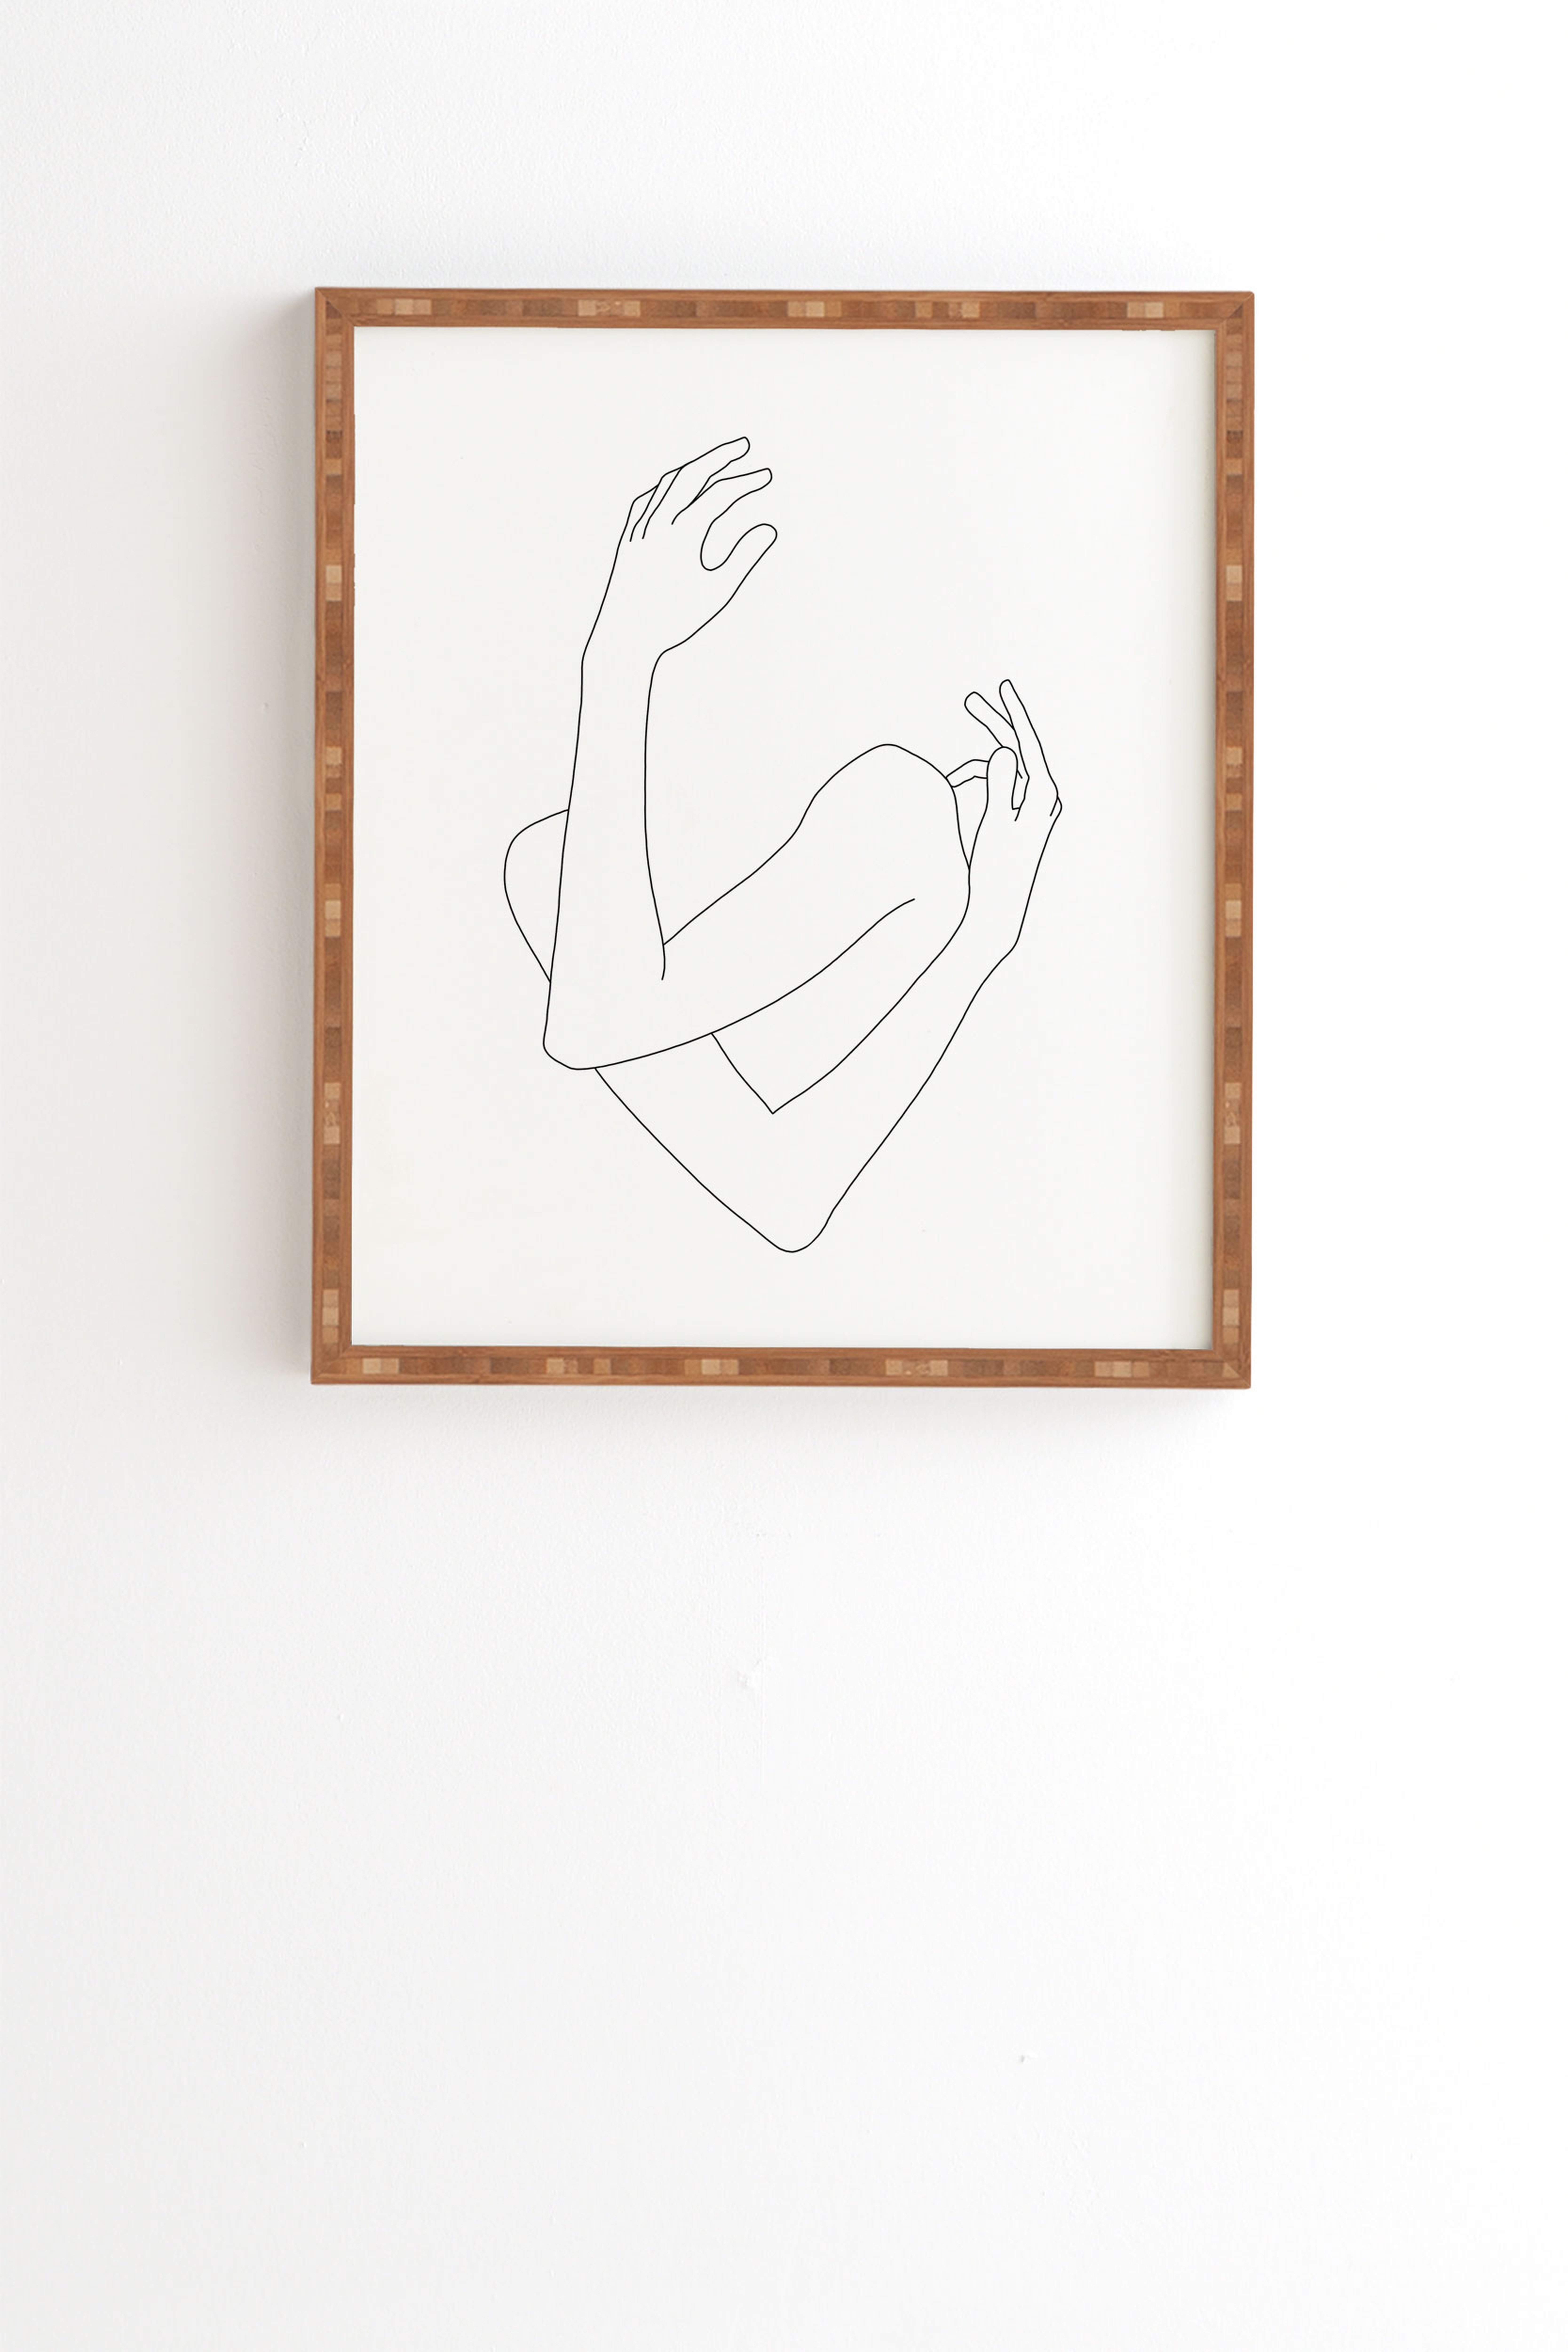 Crossed Arms Illustration Jill by The Colour Study - Framed Wall Art Bamboo 19" x 22.4" - Wander Print Co.